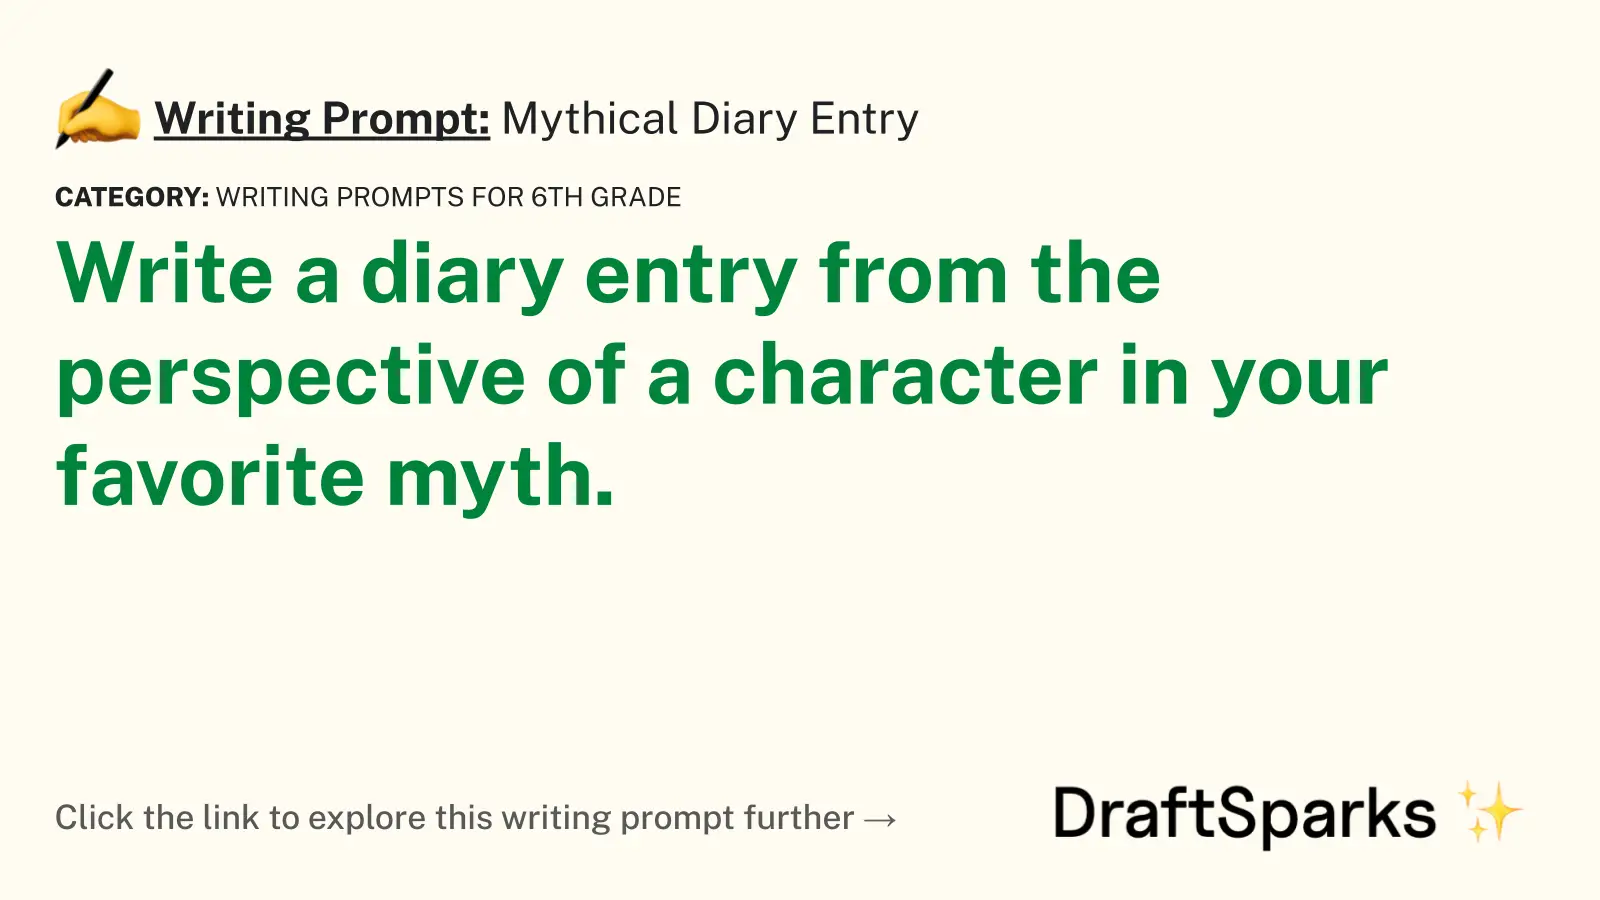 Mythical Diary Entry